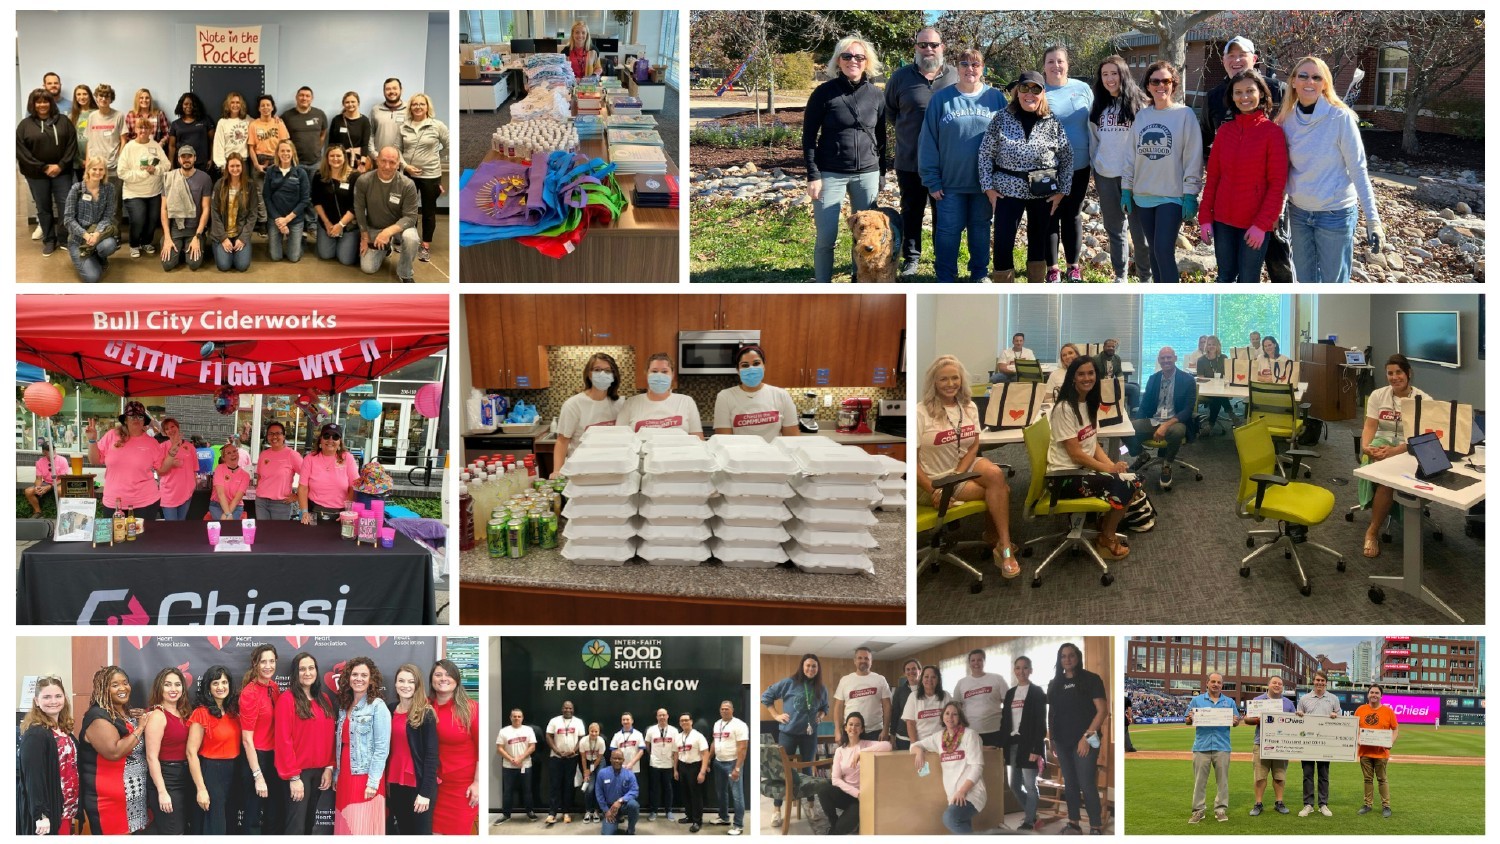 Chiesi USA donated more than $830k and around 200 employees supported 65 nonprofits (Chiesi in the Community 2022).